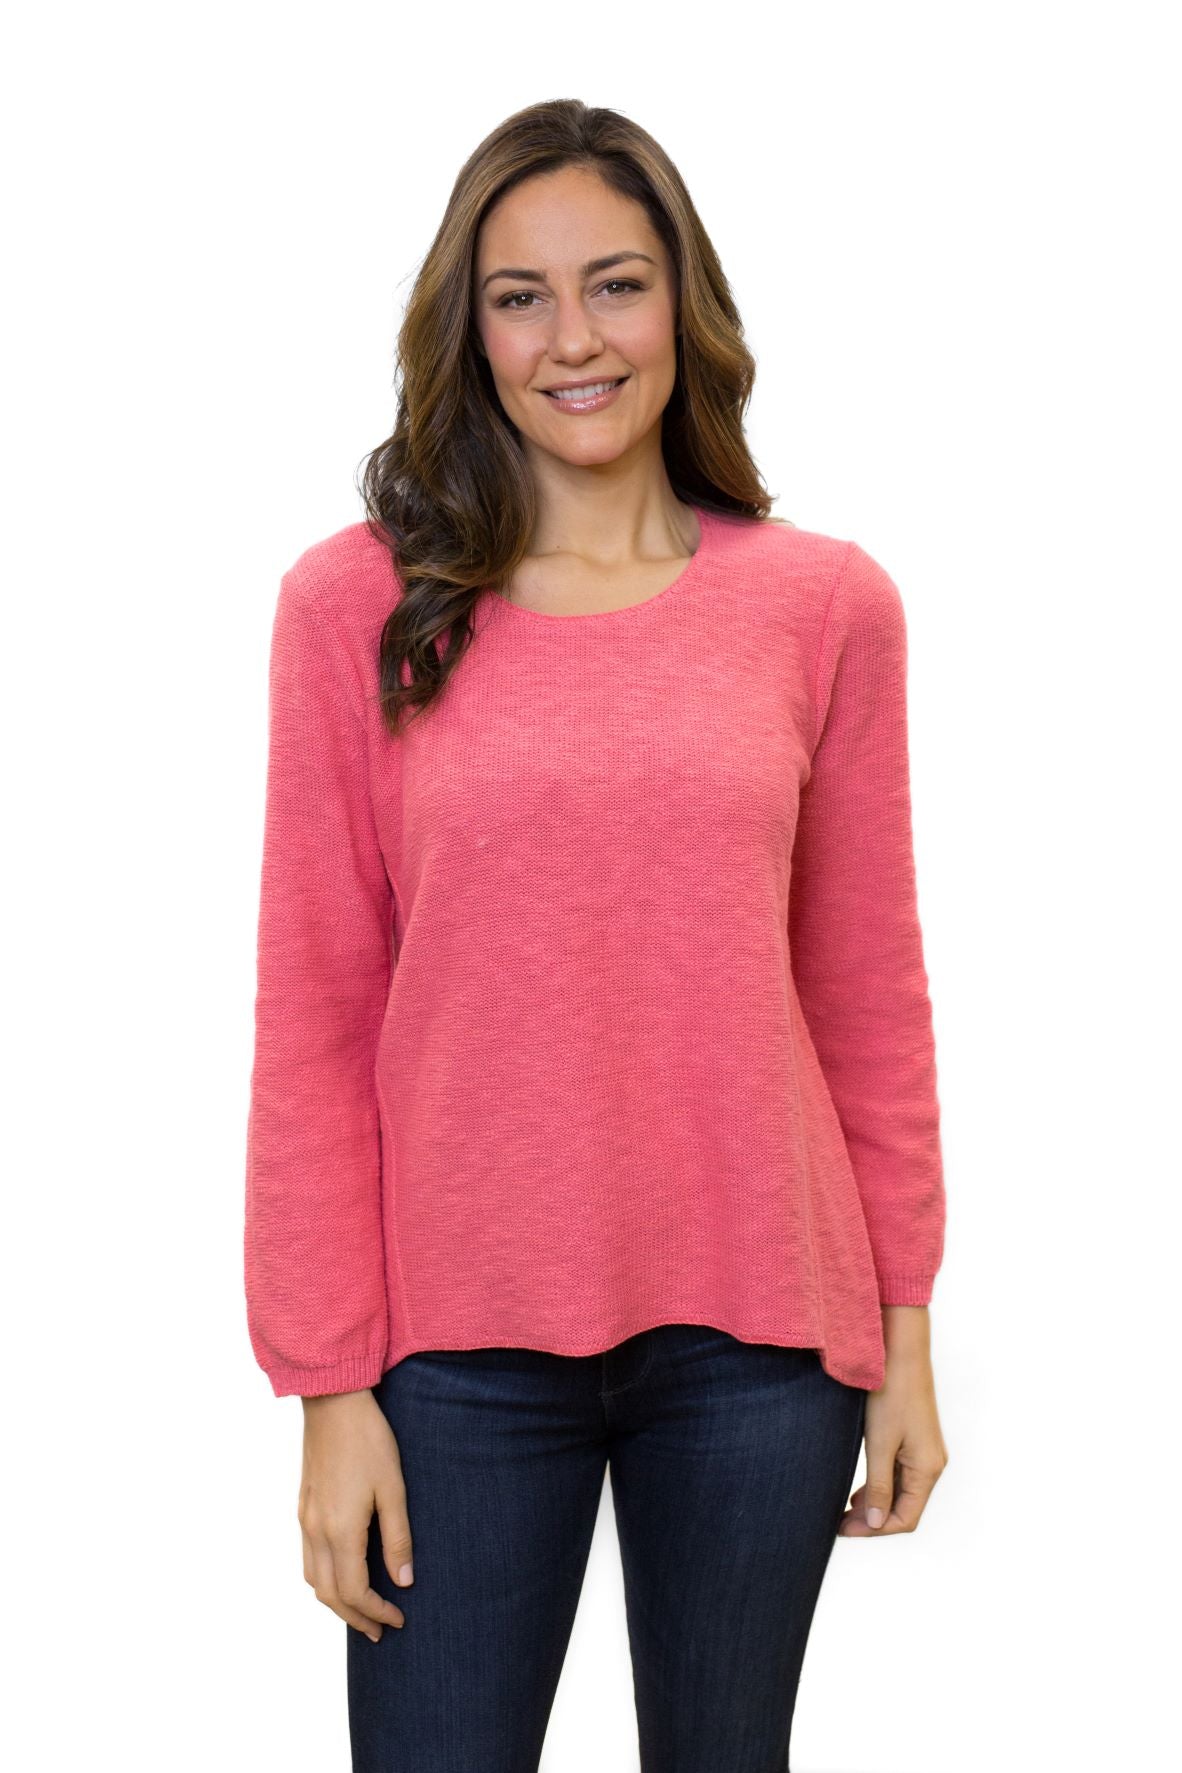 Coral Color. 100% cotton slub sweater by Avalin. This versatile sweater has long sleeves, crew neck, and high low hem that falls nicely to cover hips and derriere.